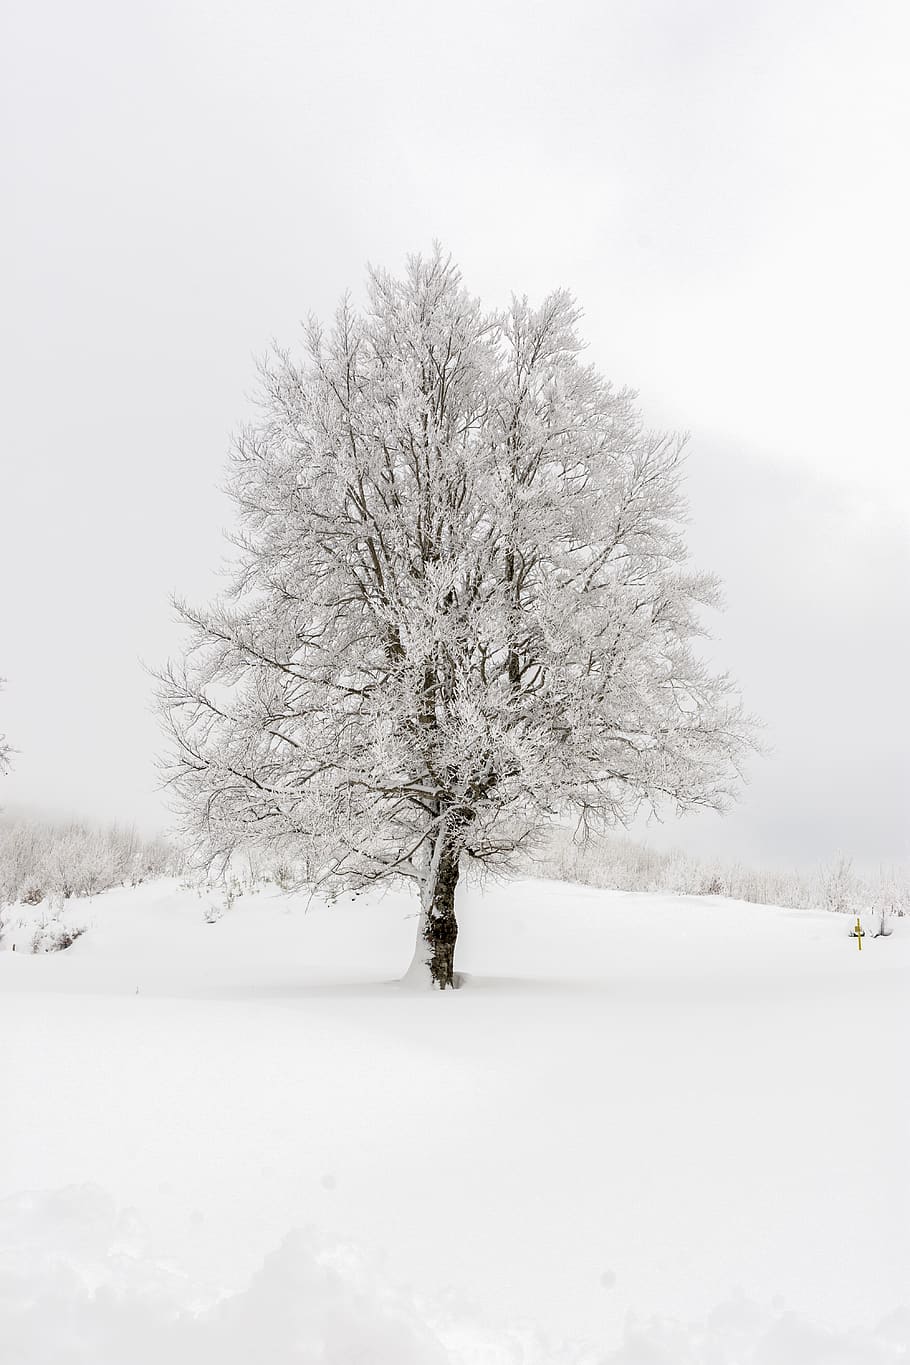 snow, winter, frozen, nature, landscape, cold, clouds, cold temperature, tree, beauty in nature